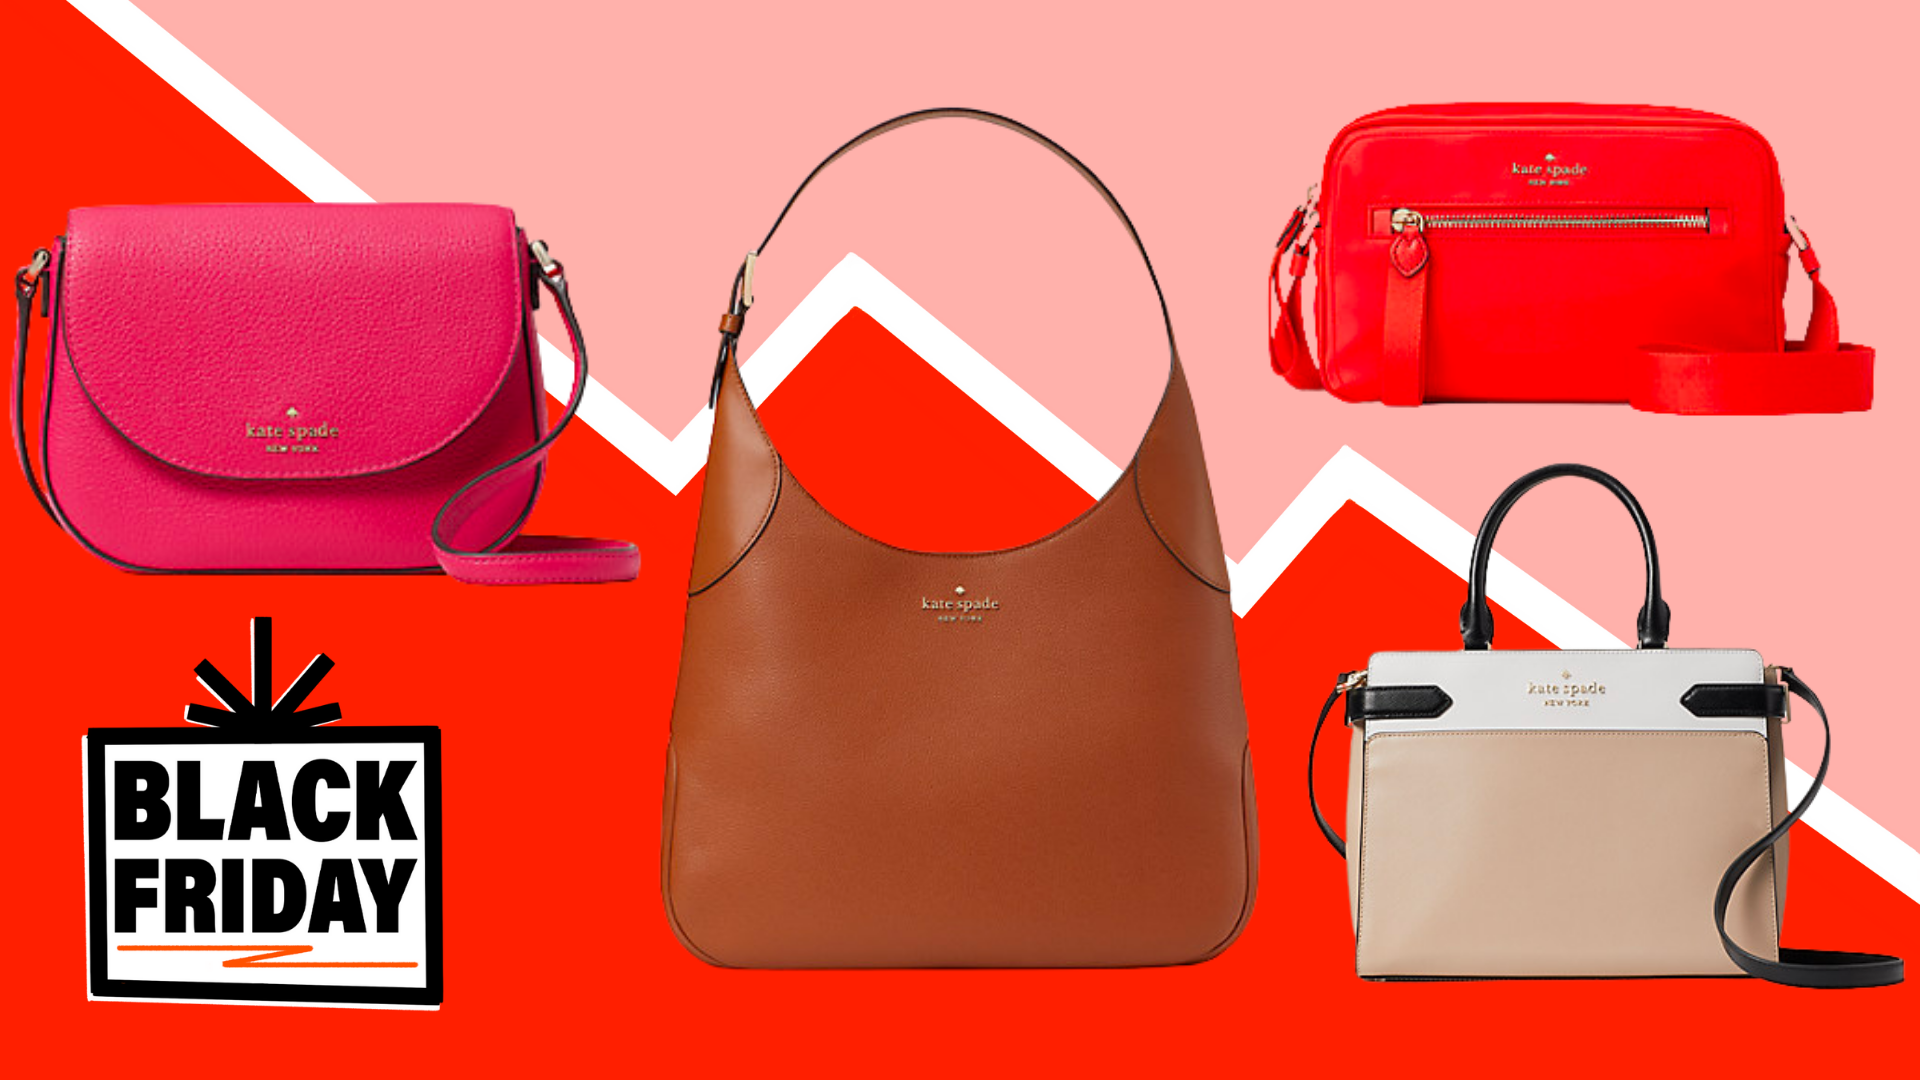 Kate Spade Black Friday isn't over yet—save big on purses at Kate Spade Surprise